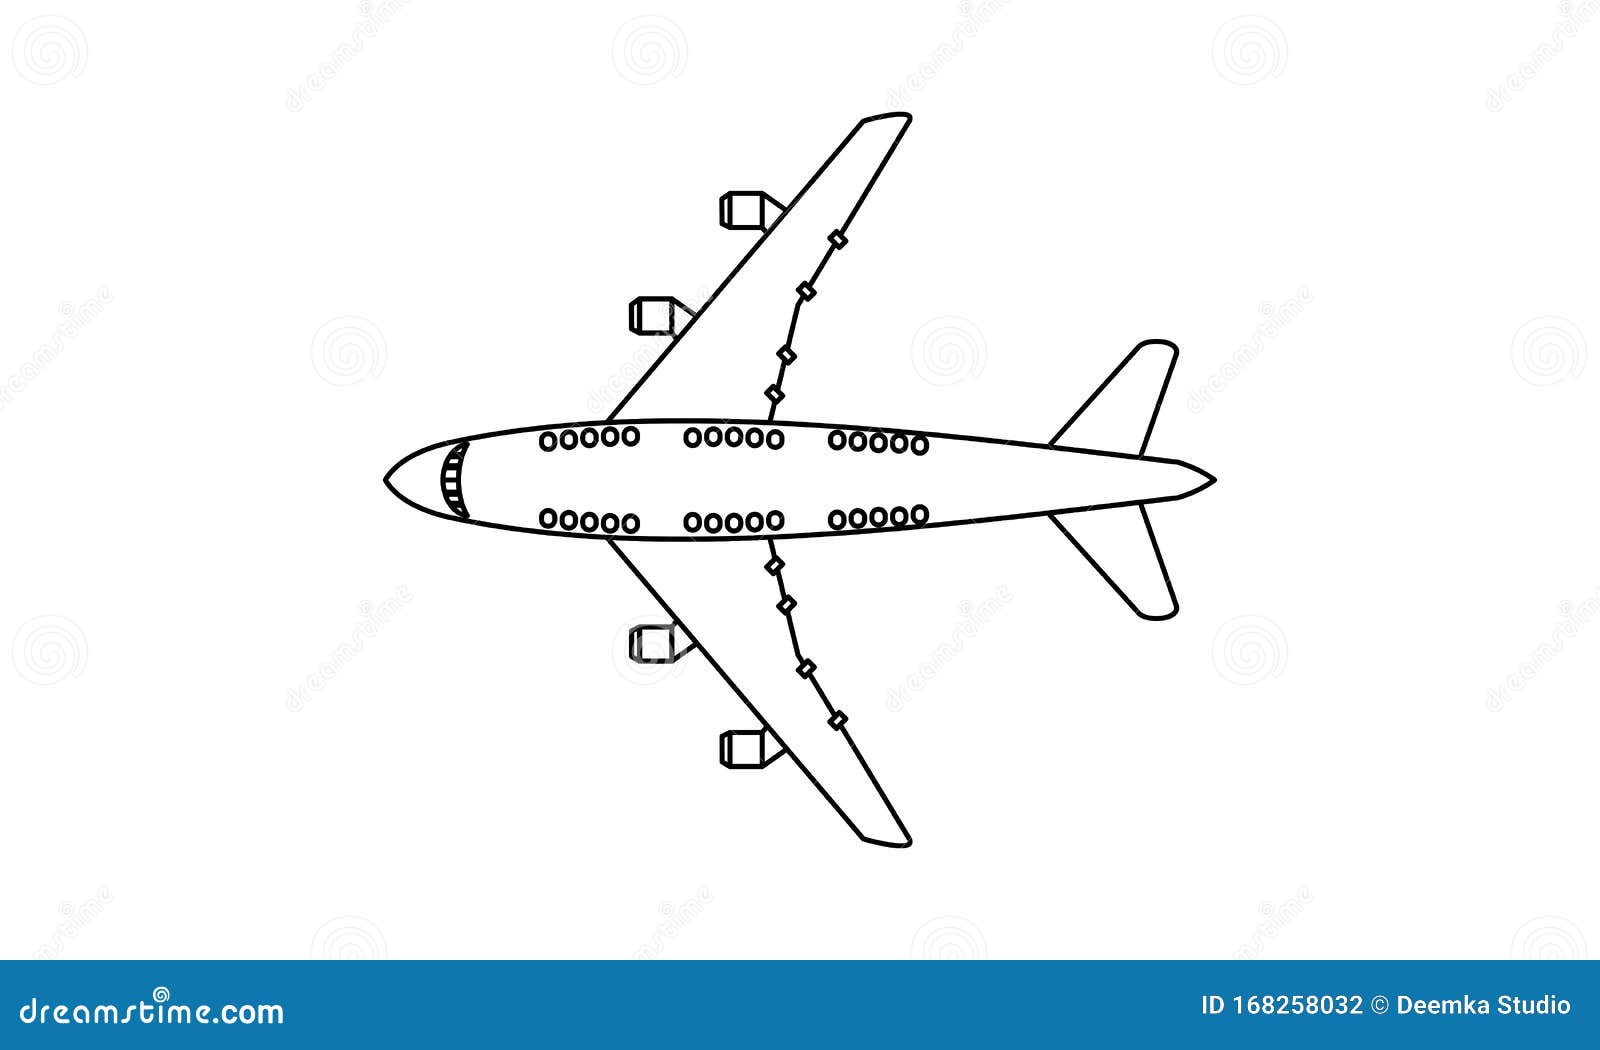 Plane Coloring Book Transportation To Educate Kids. Learn Colors ...